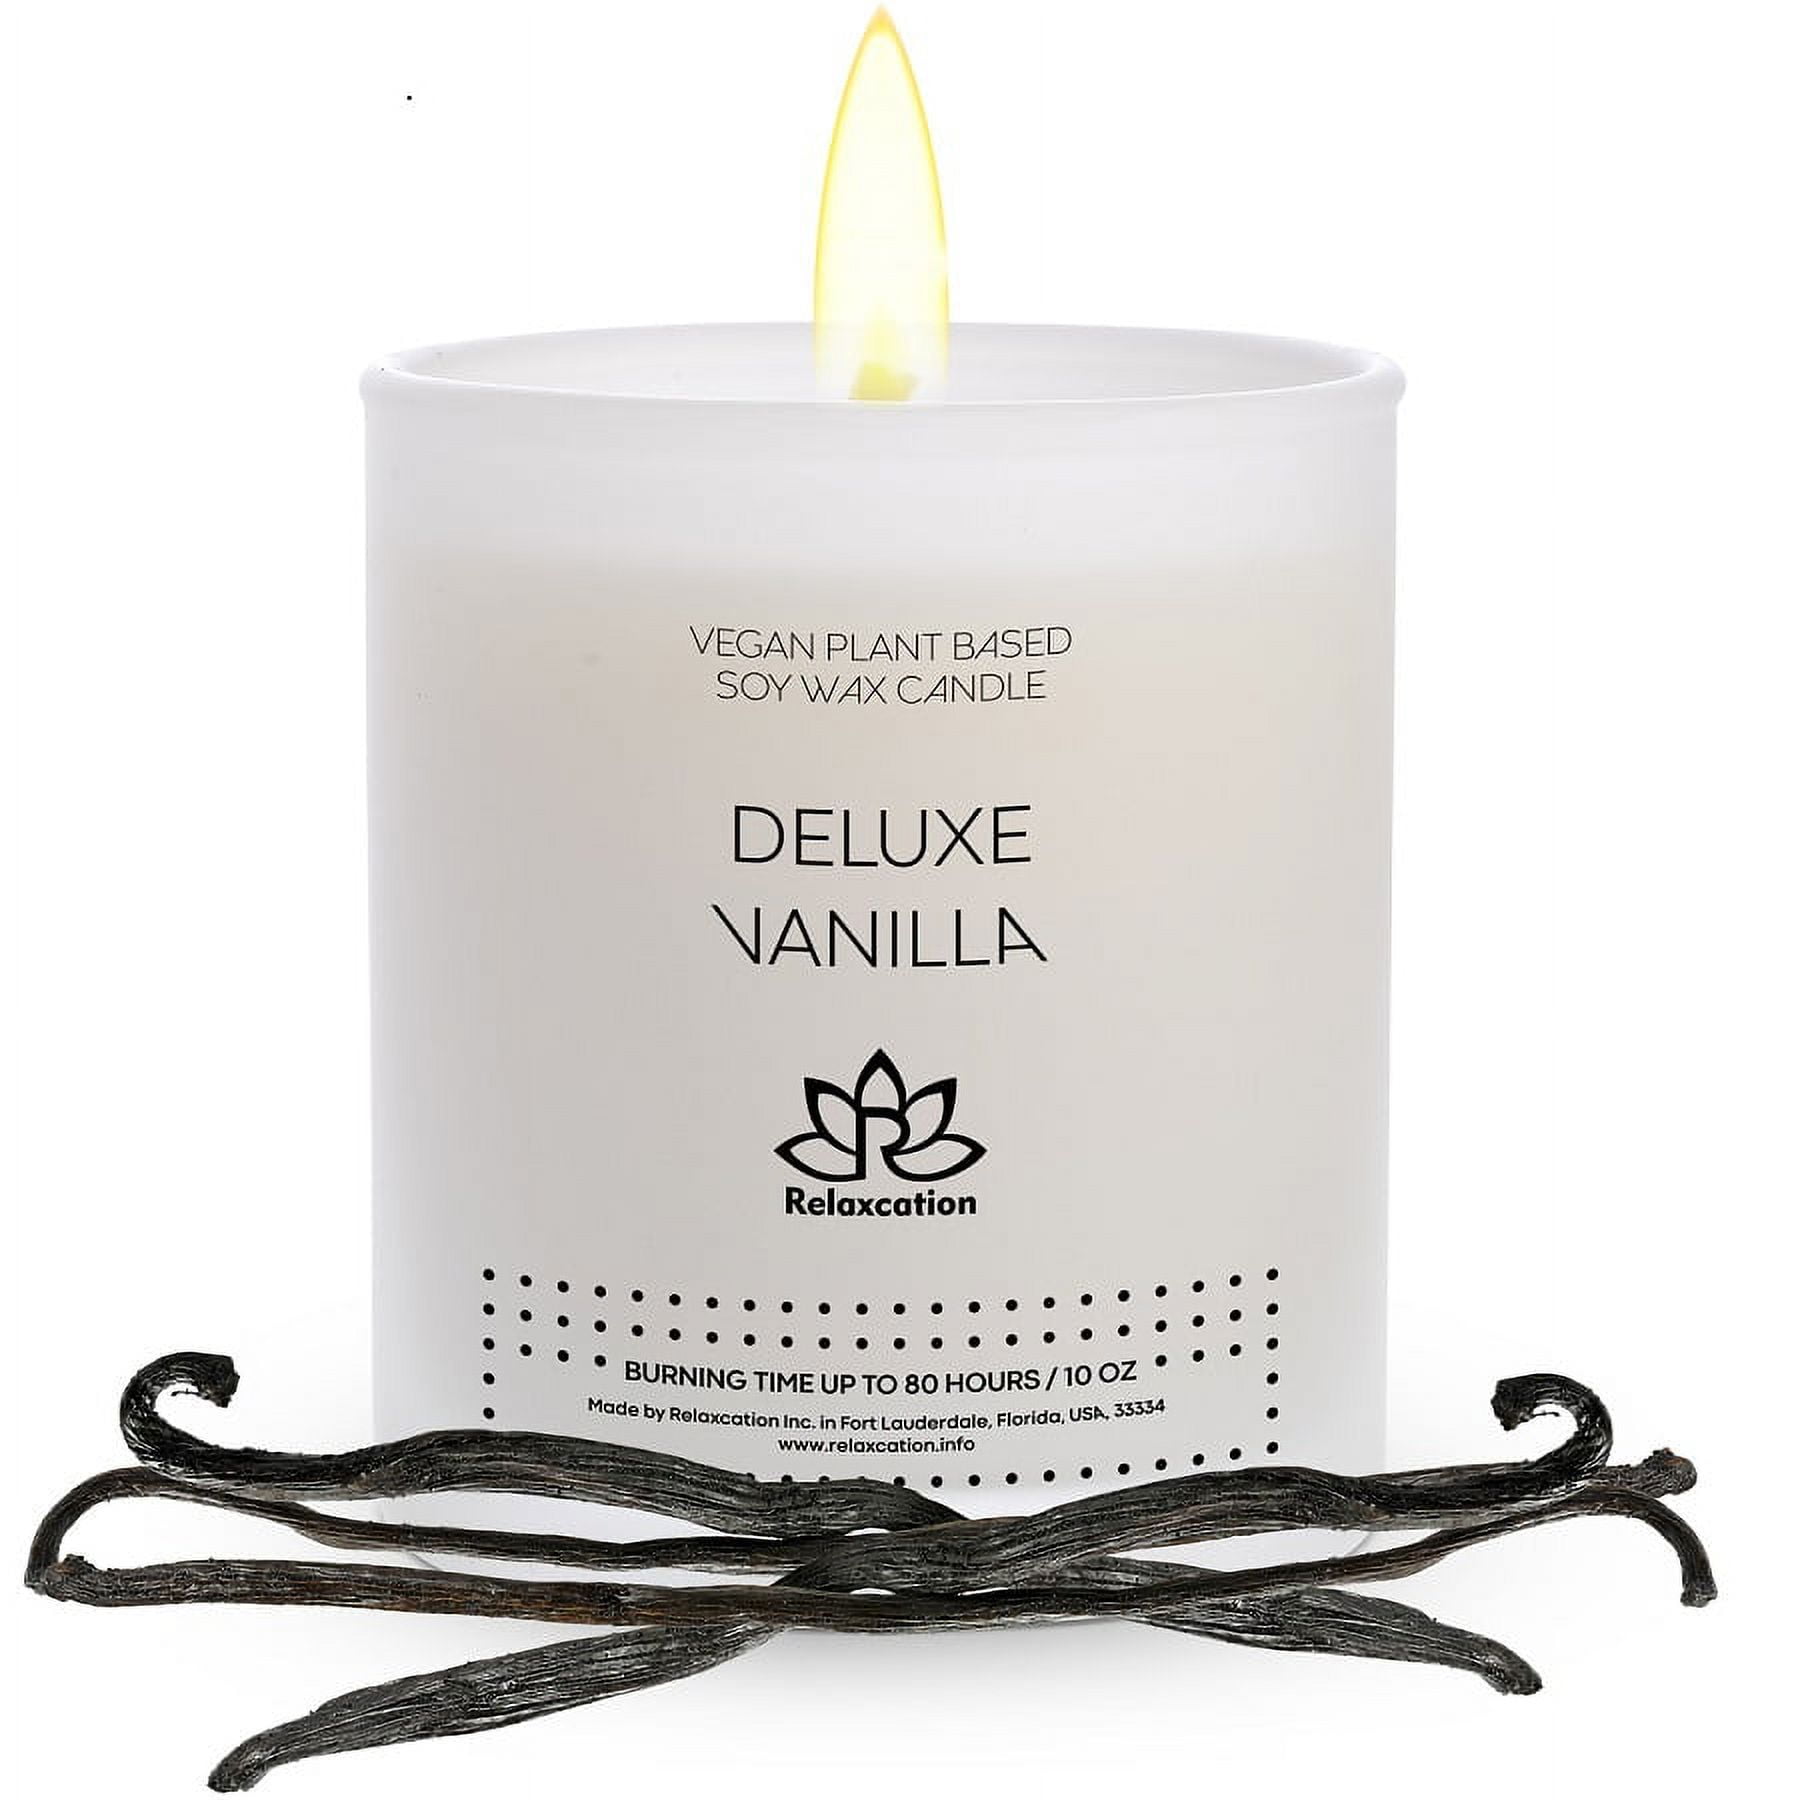 Natural Soy Wax Candle Scented，wooden cover and White Glass- 3.5oz 20-22  Hour Clean Burning 